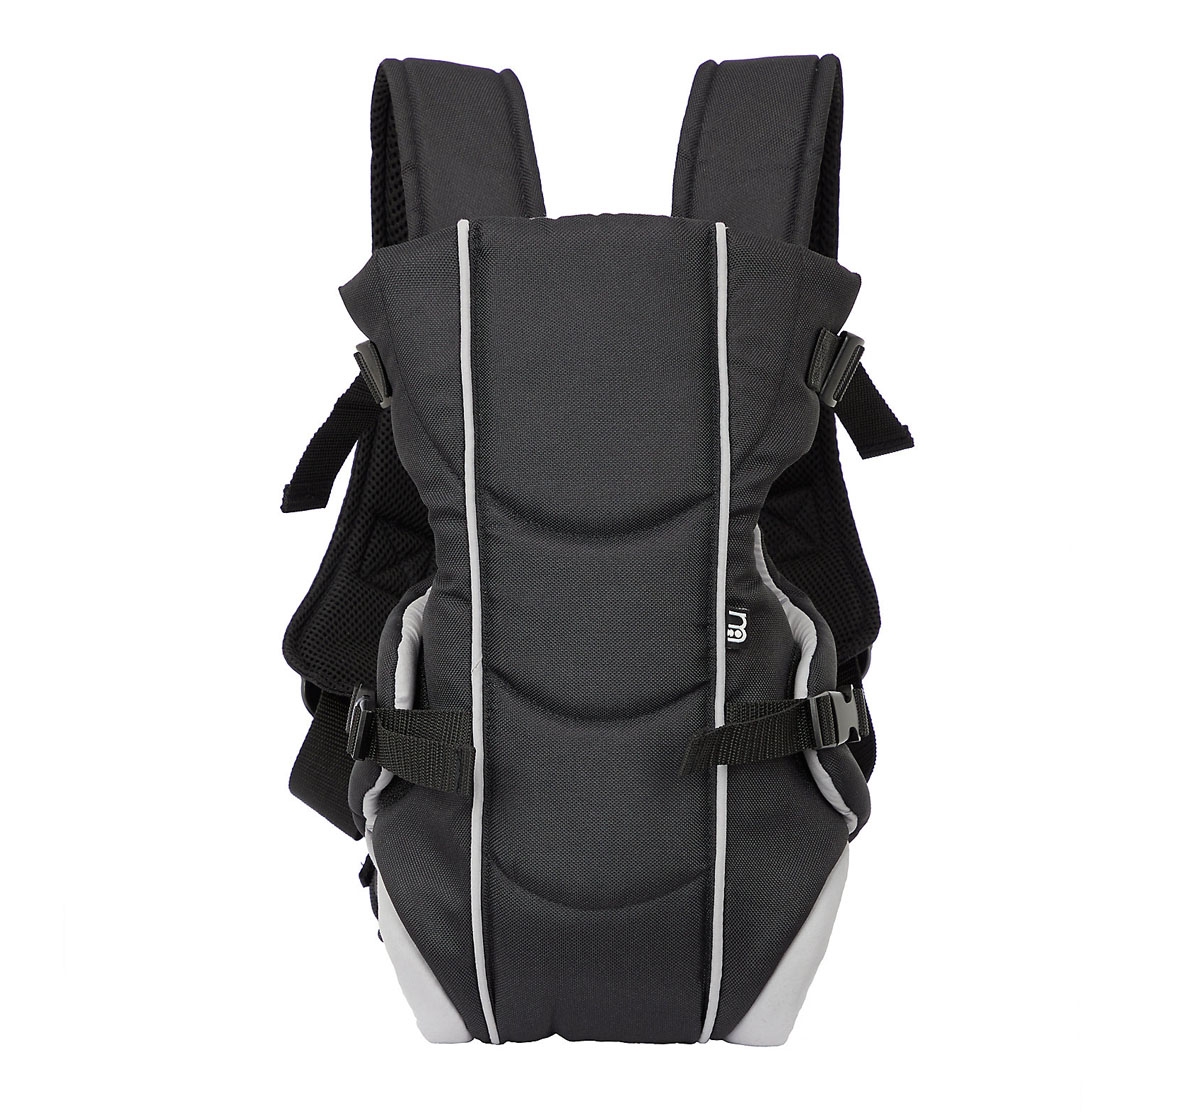 Mothercare Carr 3 Position Baby Carrier Black